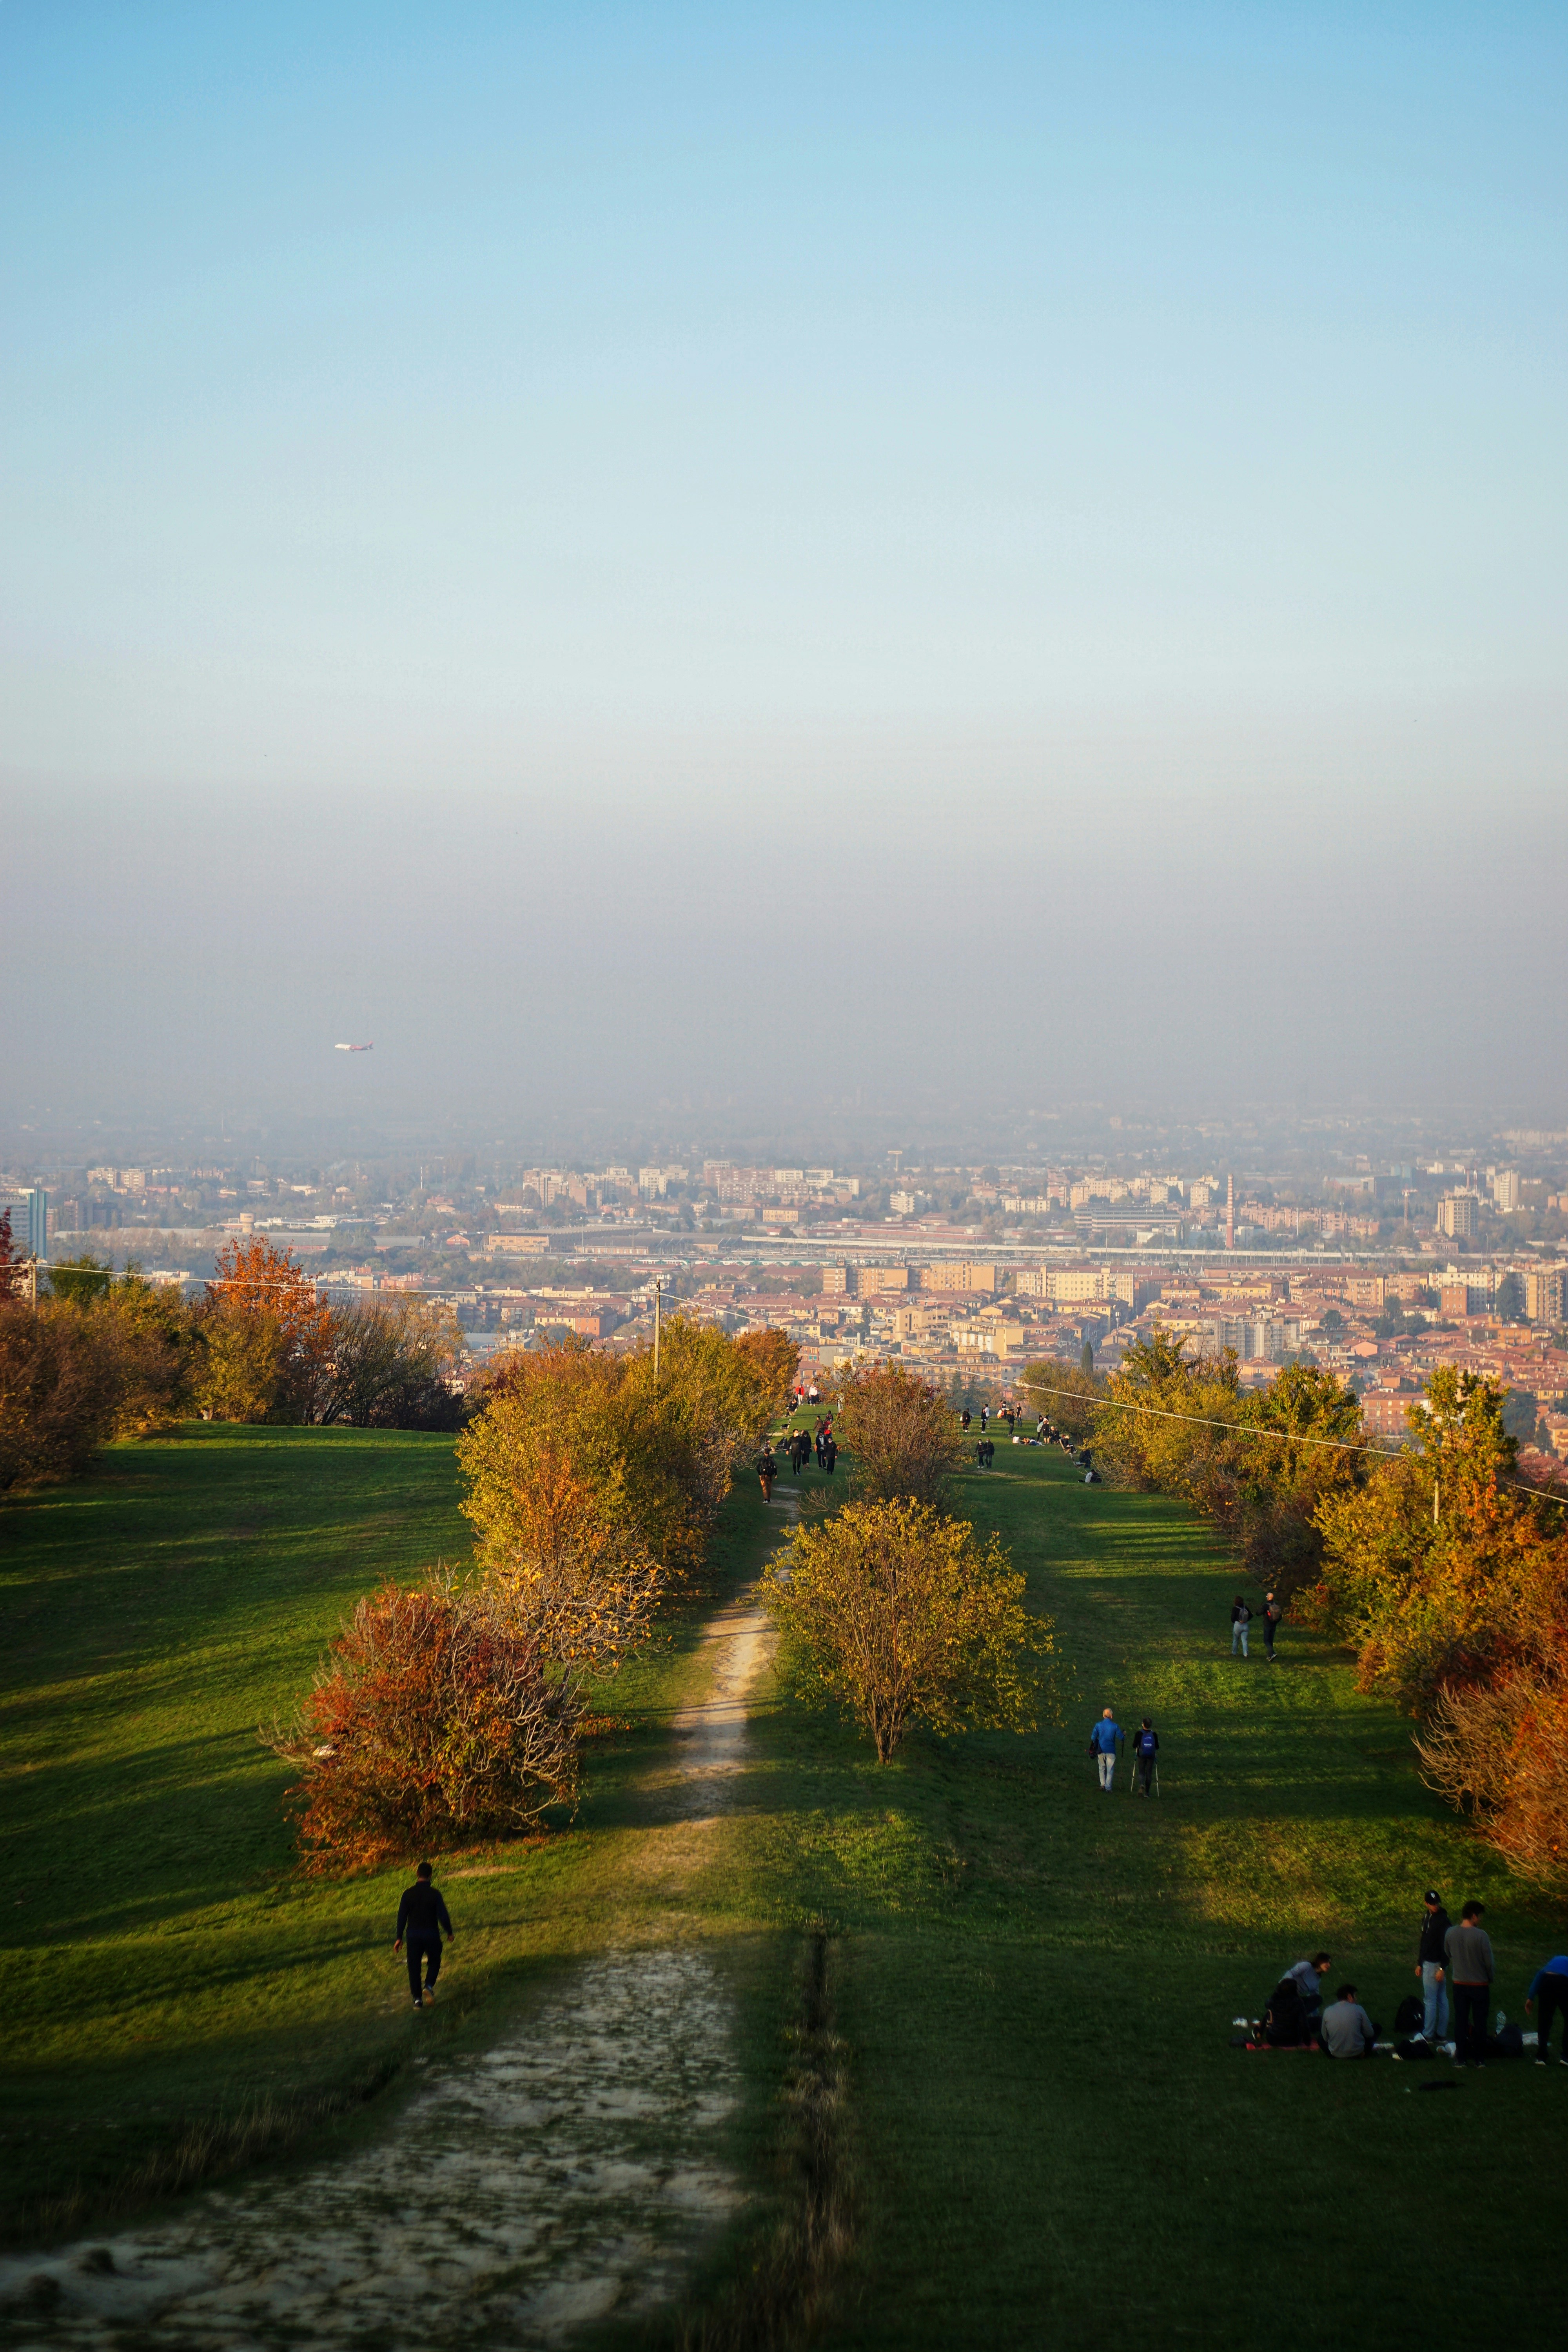 View of Bologna from Parco del San Pellegrino